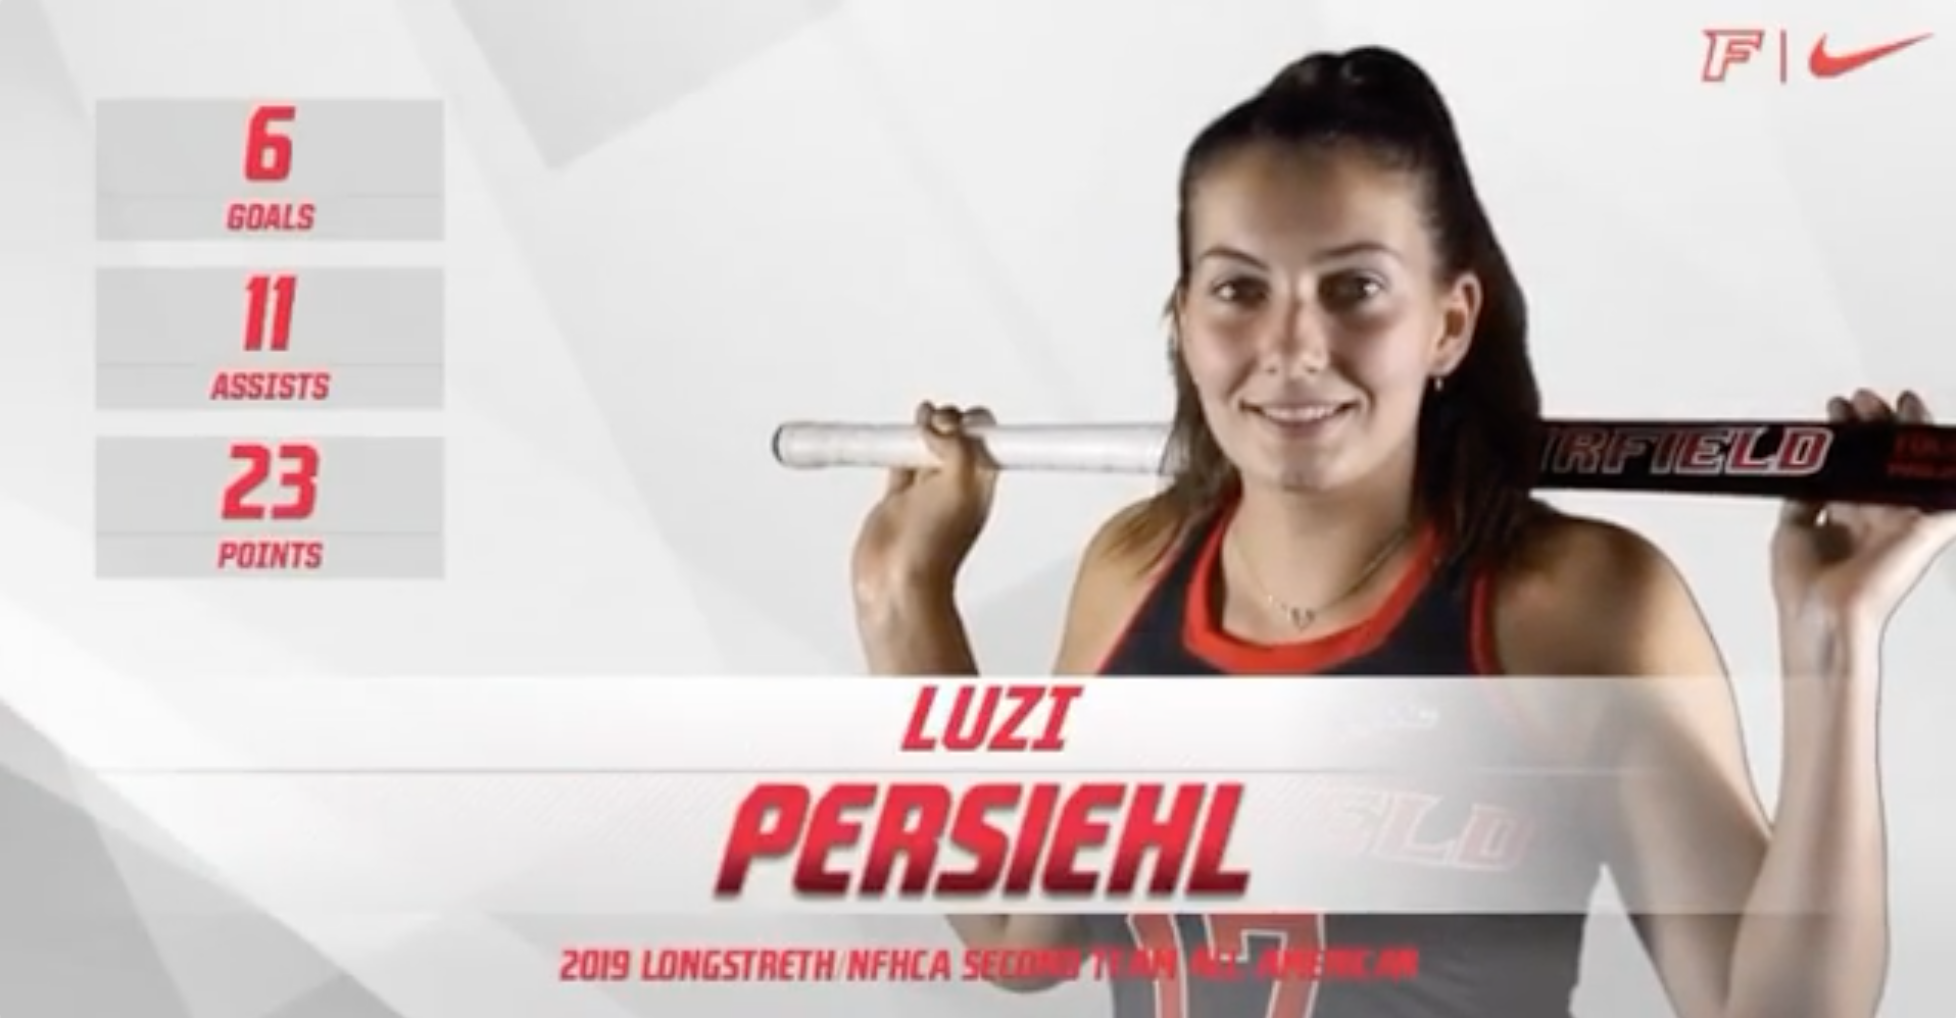 You are currently viewing 1st All-American in Fairfield History – Luzi Persiehl